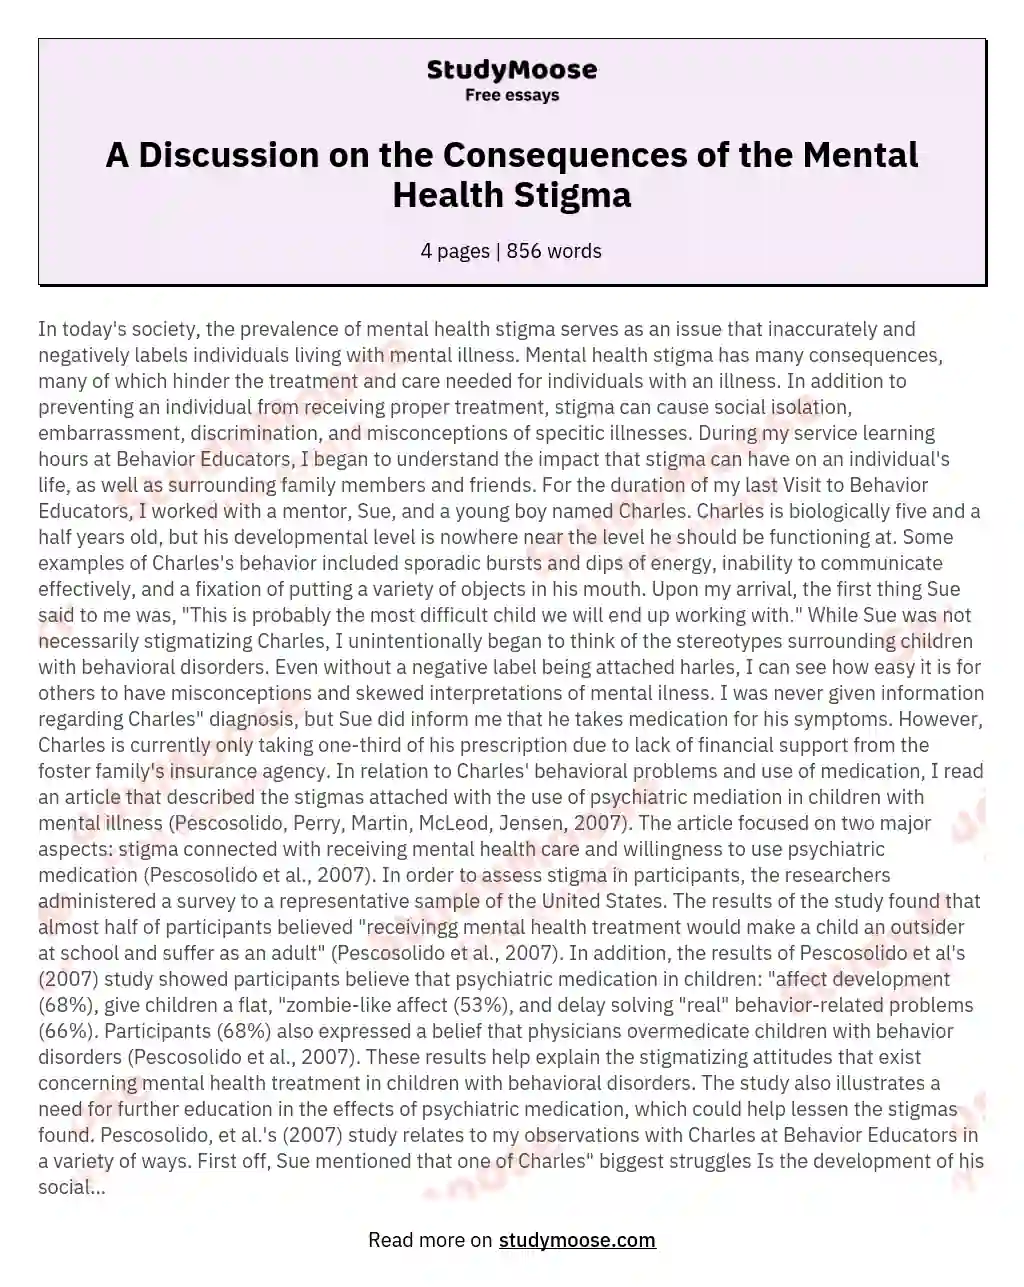 A Discussion on the Consequences of the Mental Health Stigma essay